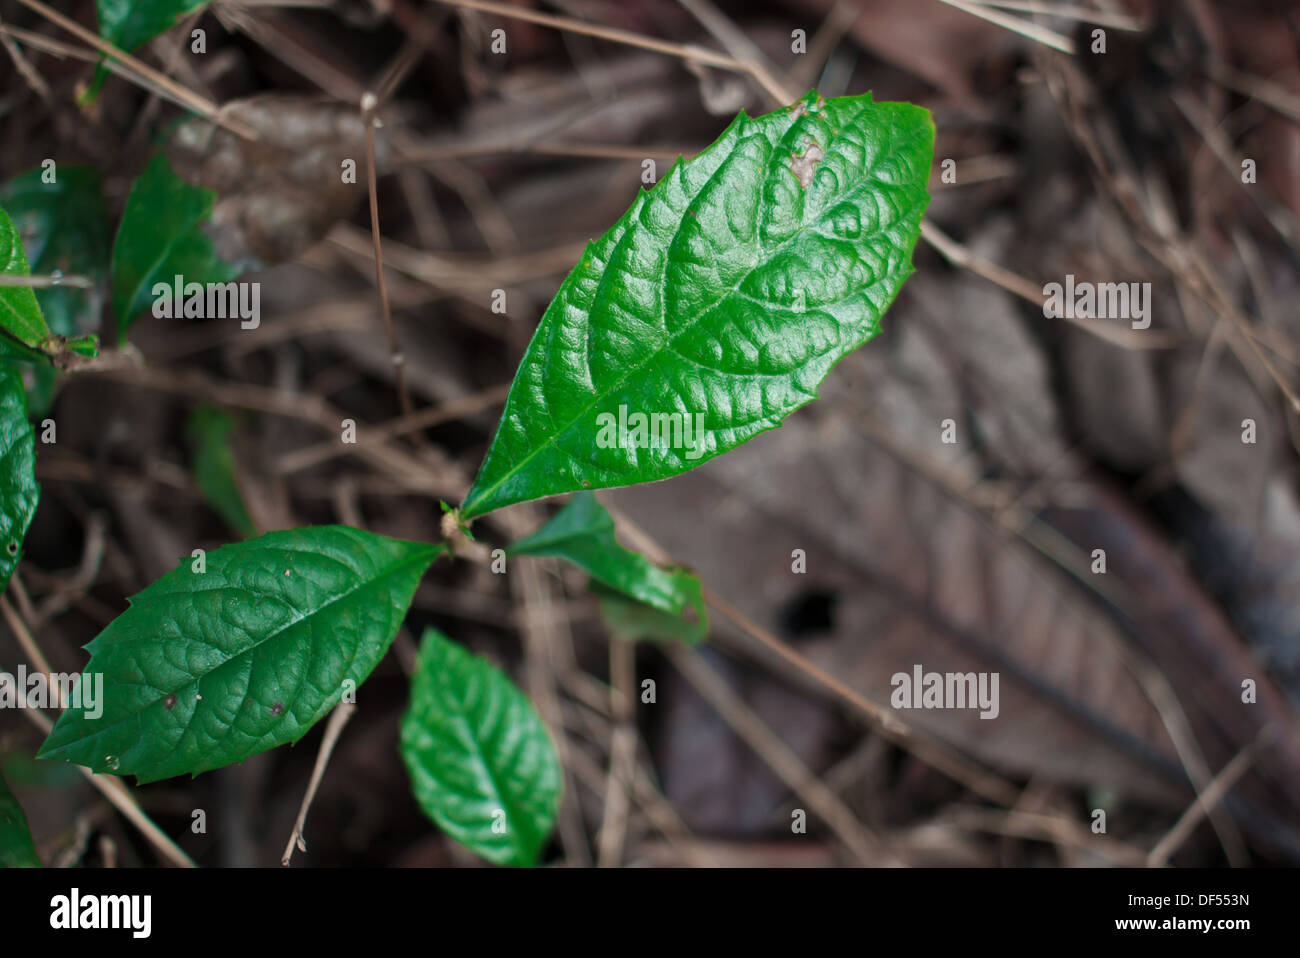 young loquat tree Stock Photo